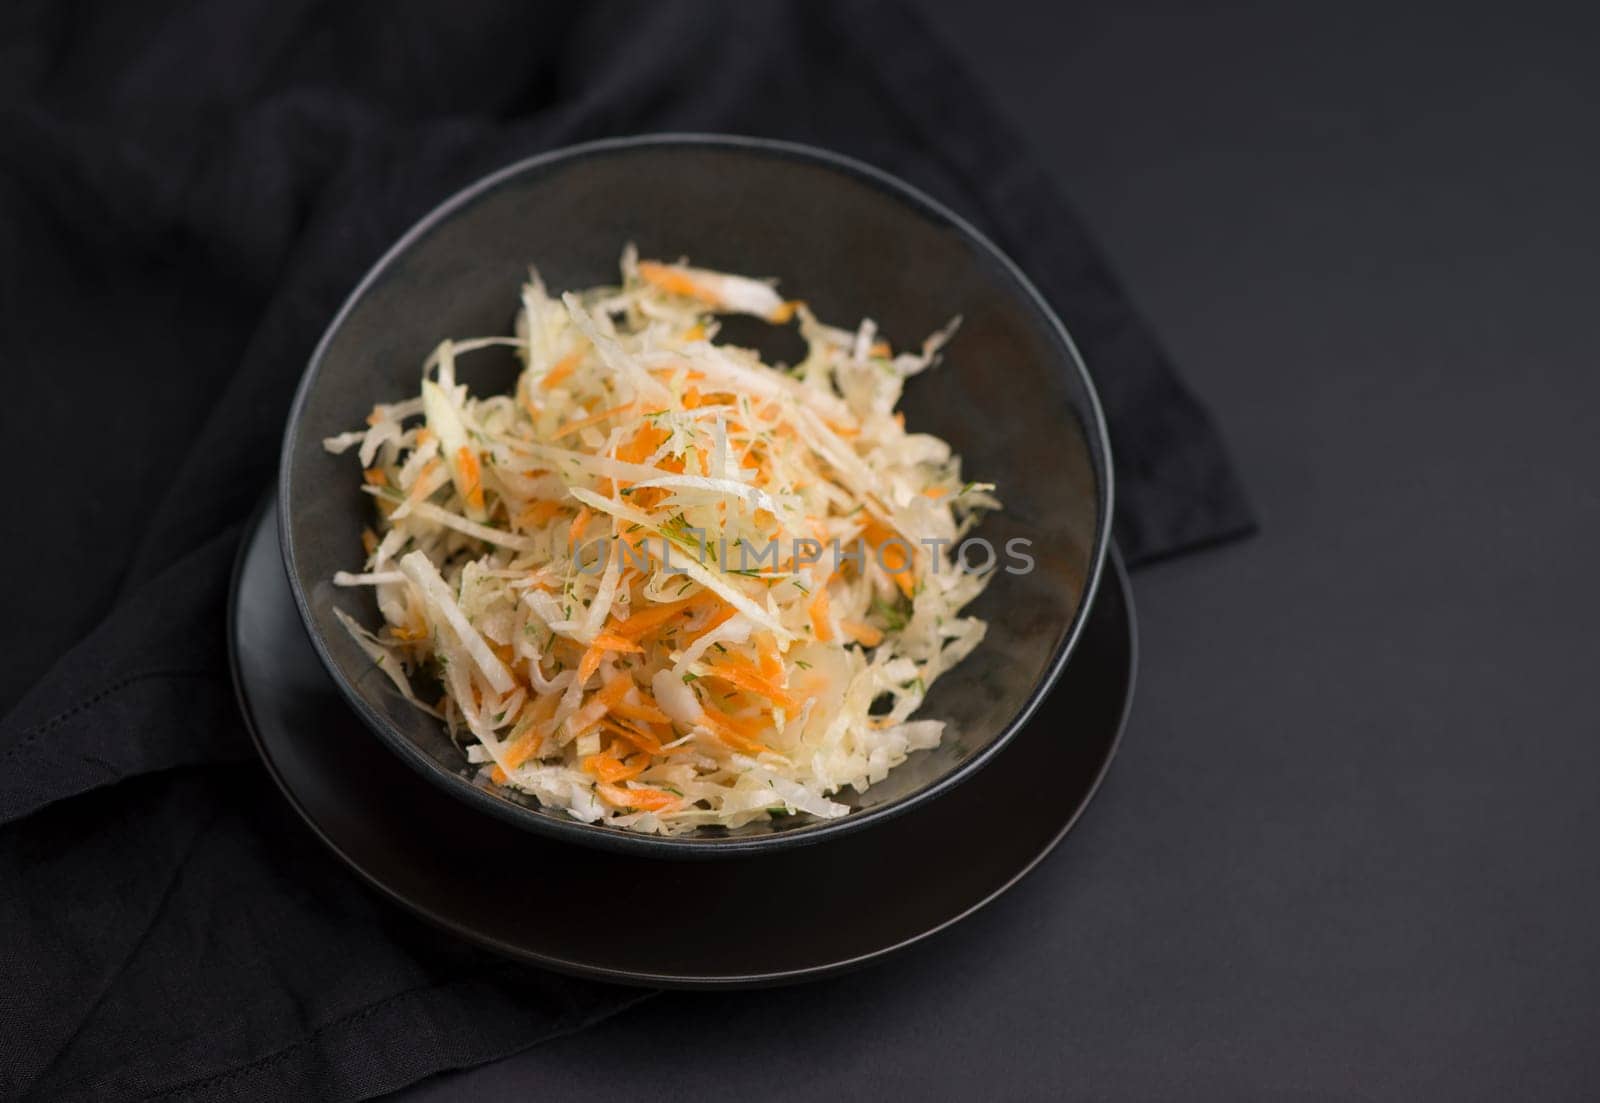 Cabbage salad. Homemade salad of cabbage, carrots and apples in a wooden bowl on a dark background top view.